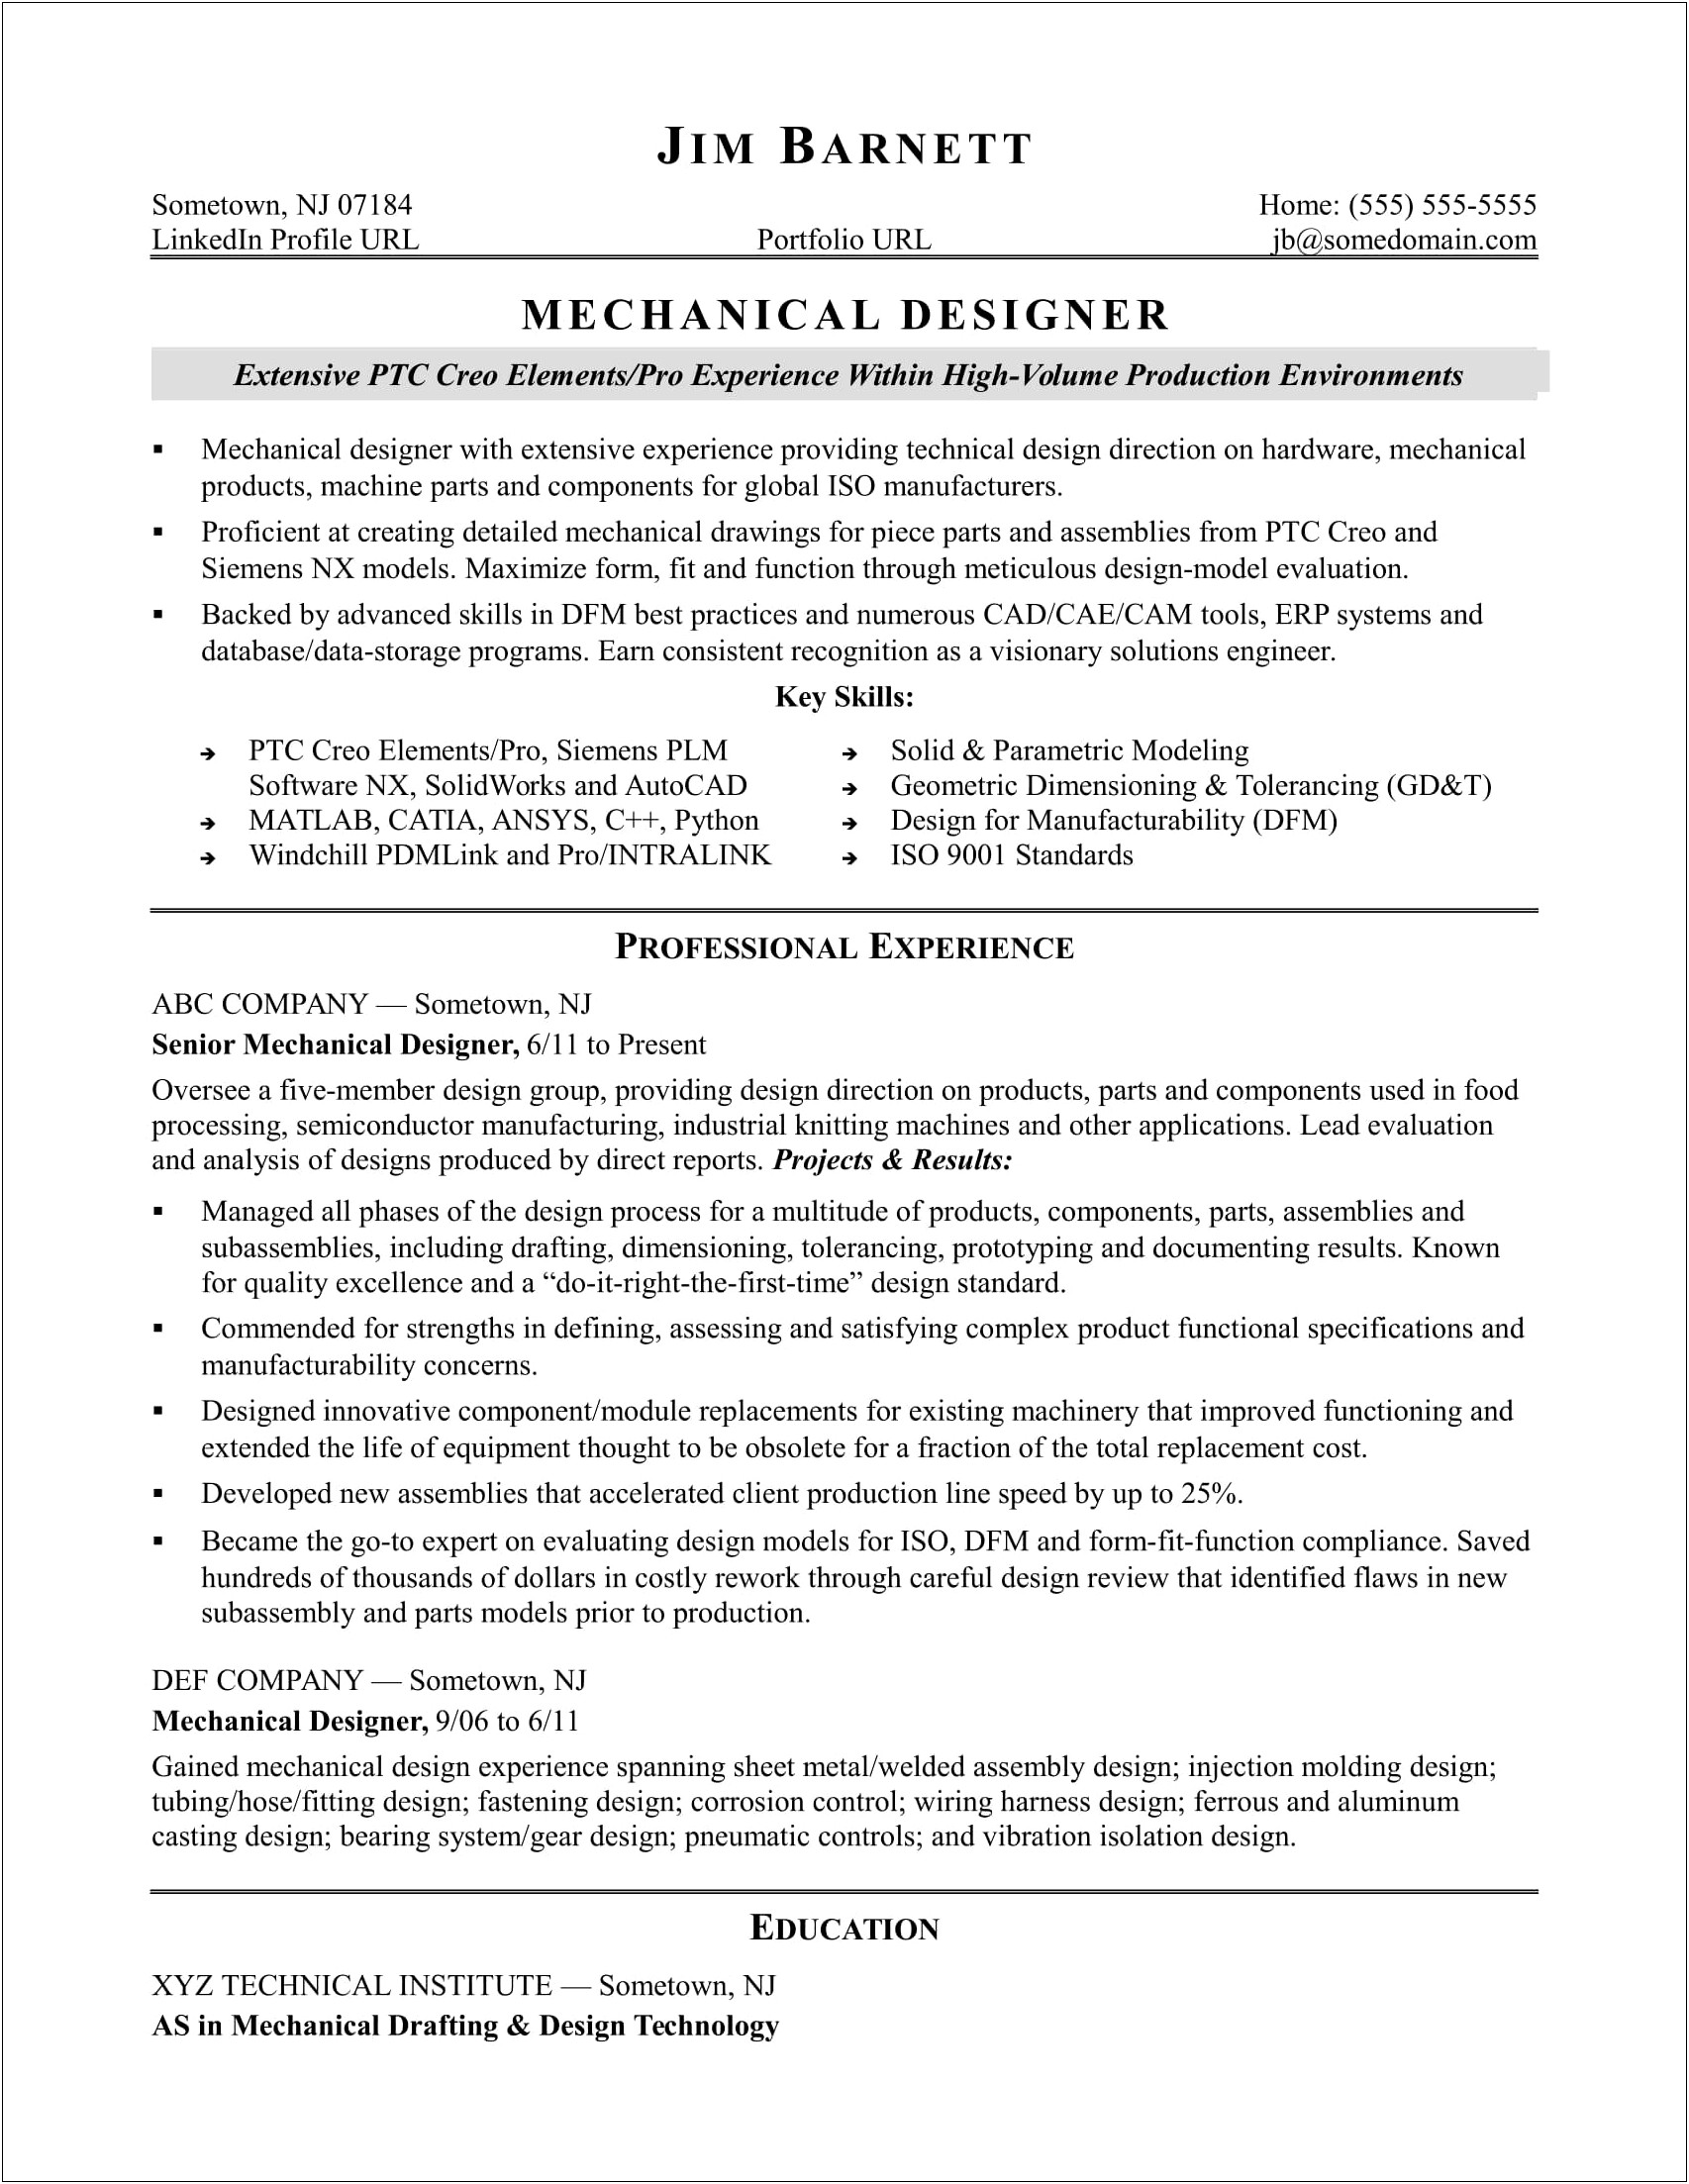 Experience Part Of A Resume Example